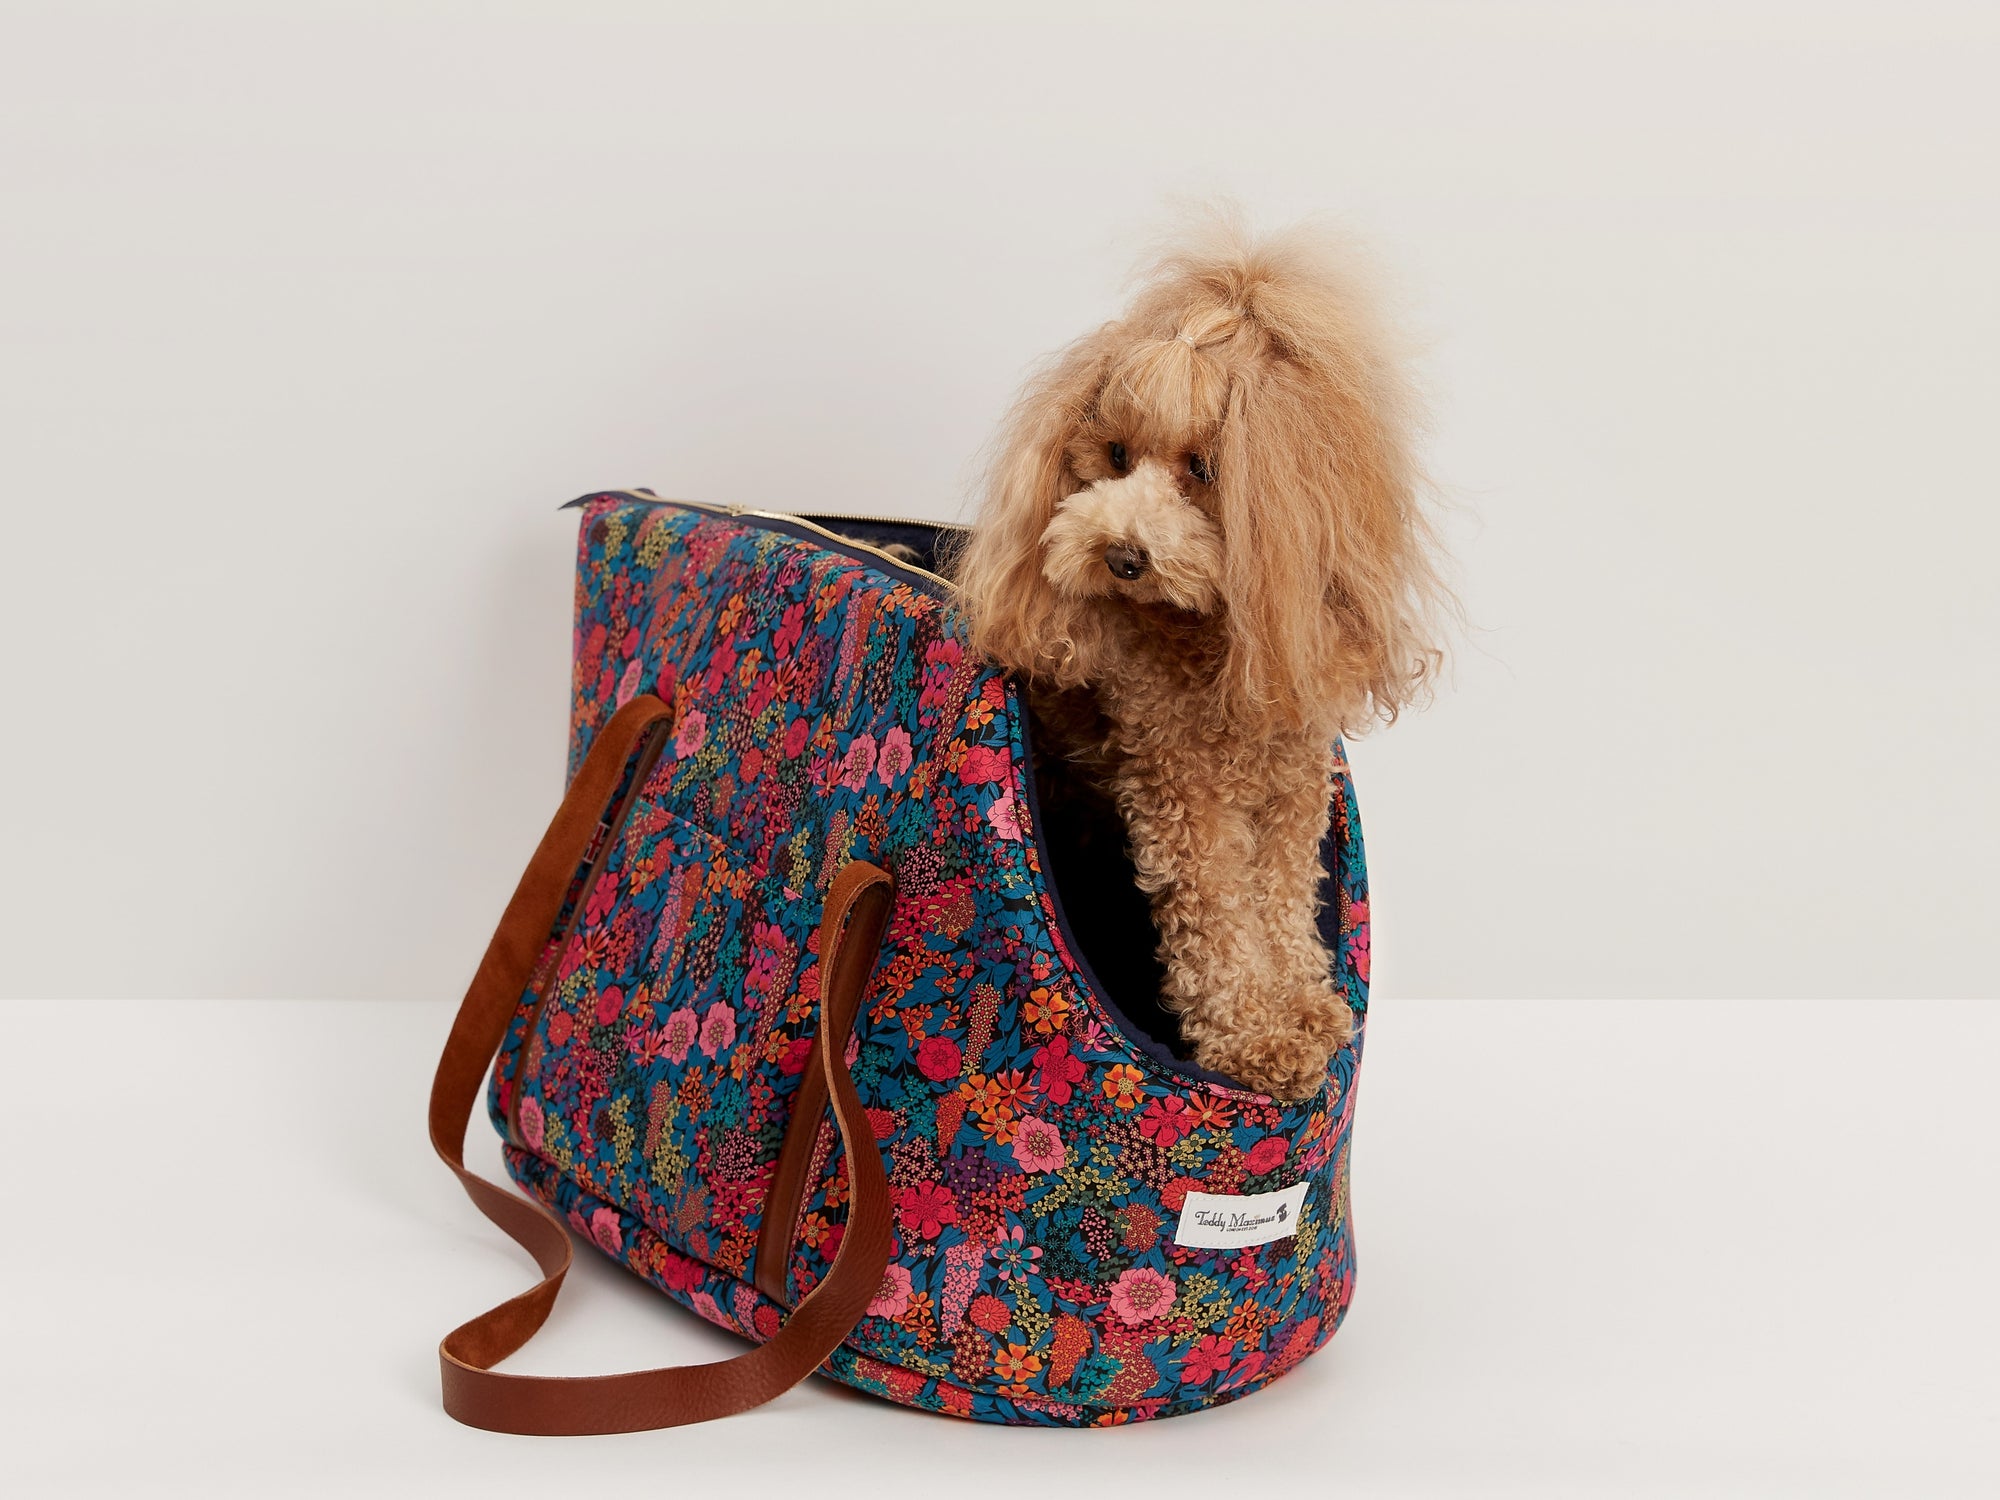 A beautiful Poodle in a Liberty print luxury dog carrier by Teddy Maximus